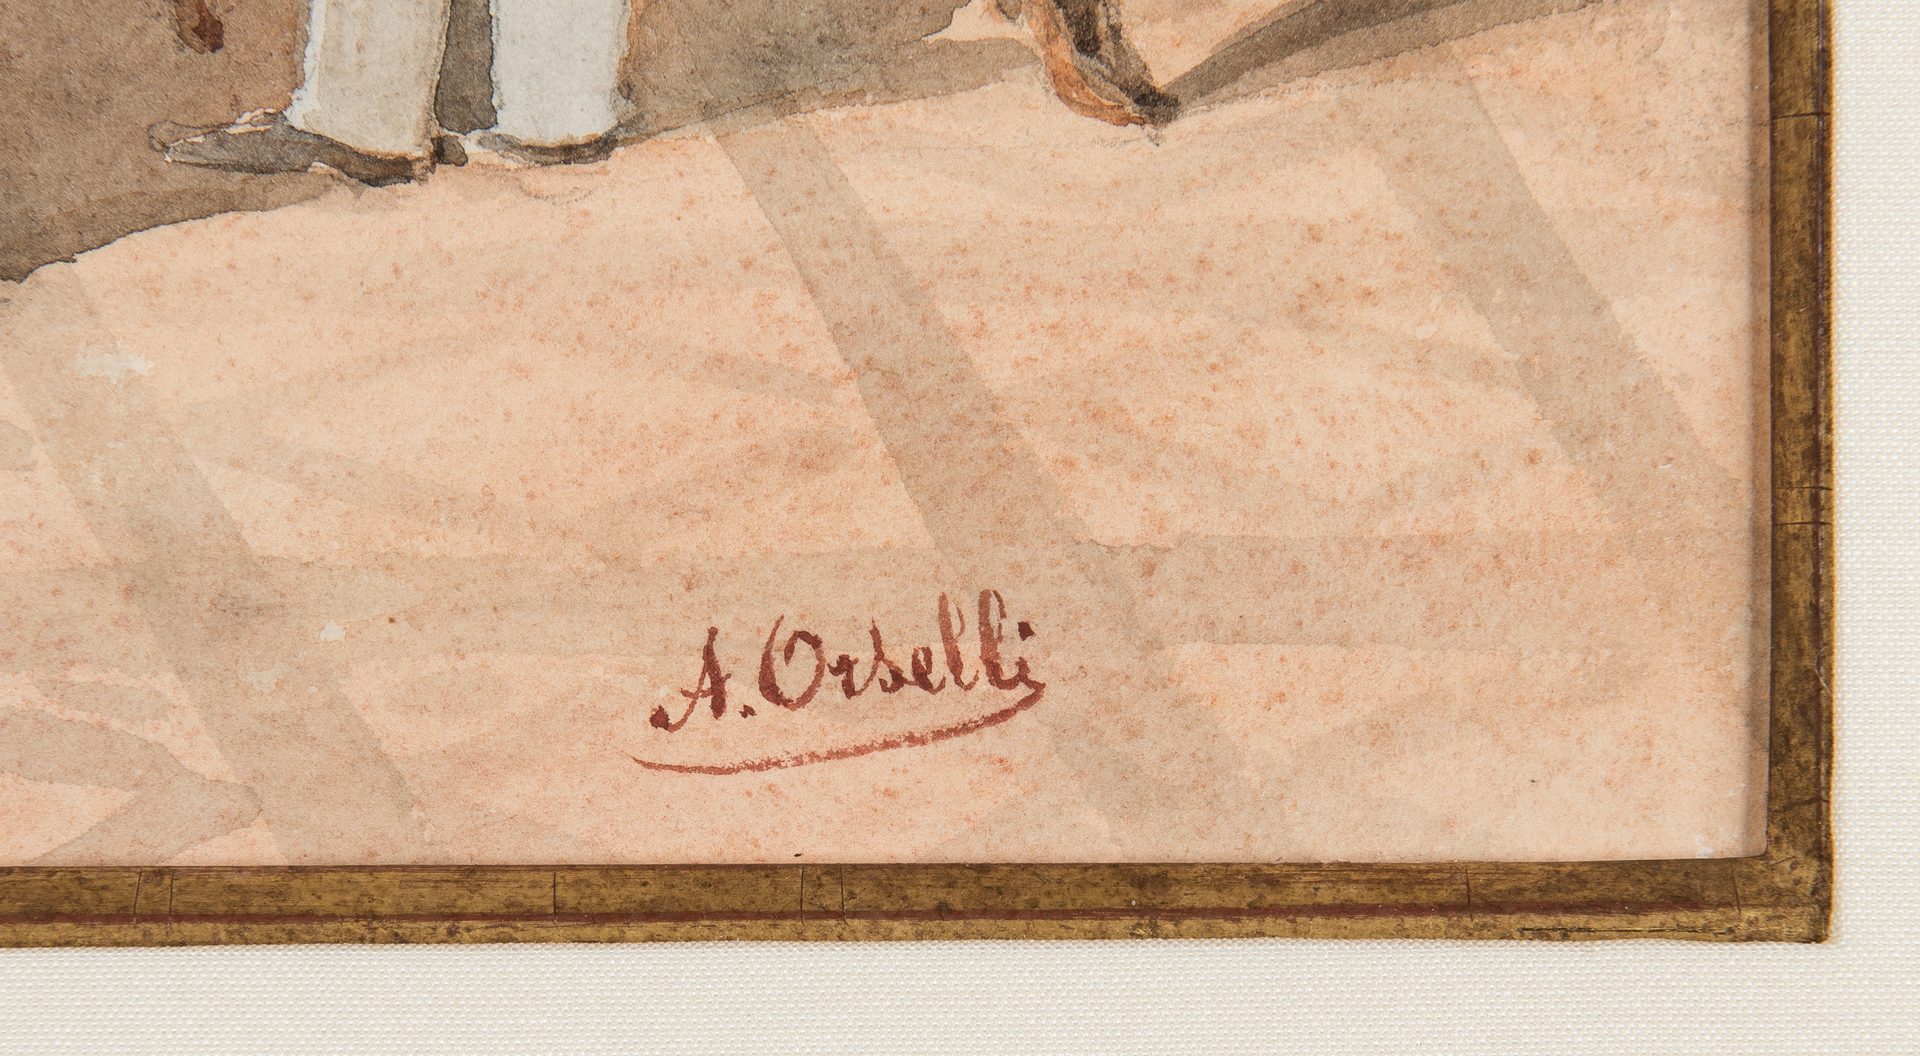 Lot 61: A. Orselli Watercolor on Paper, At the Roulette Table